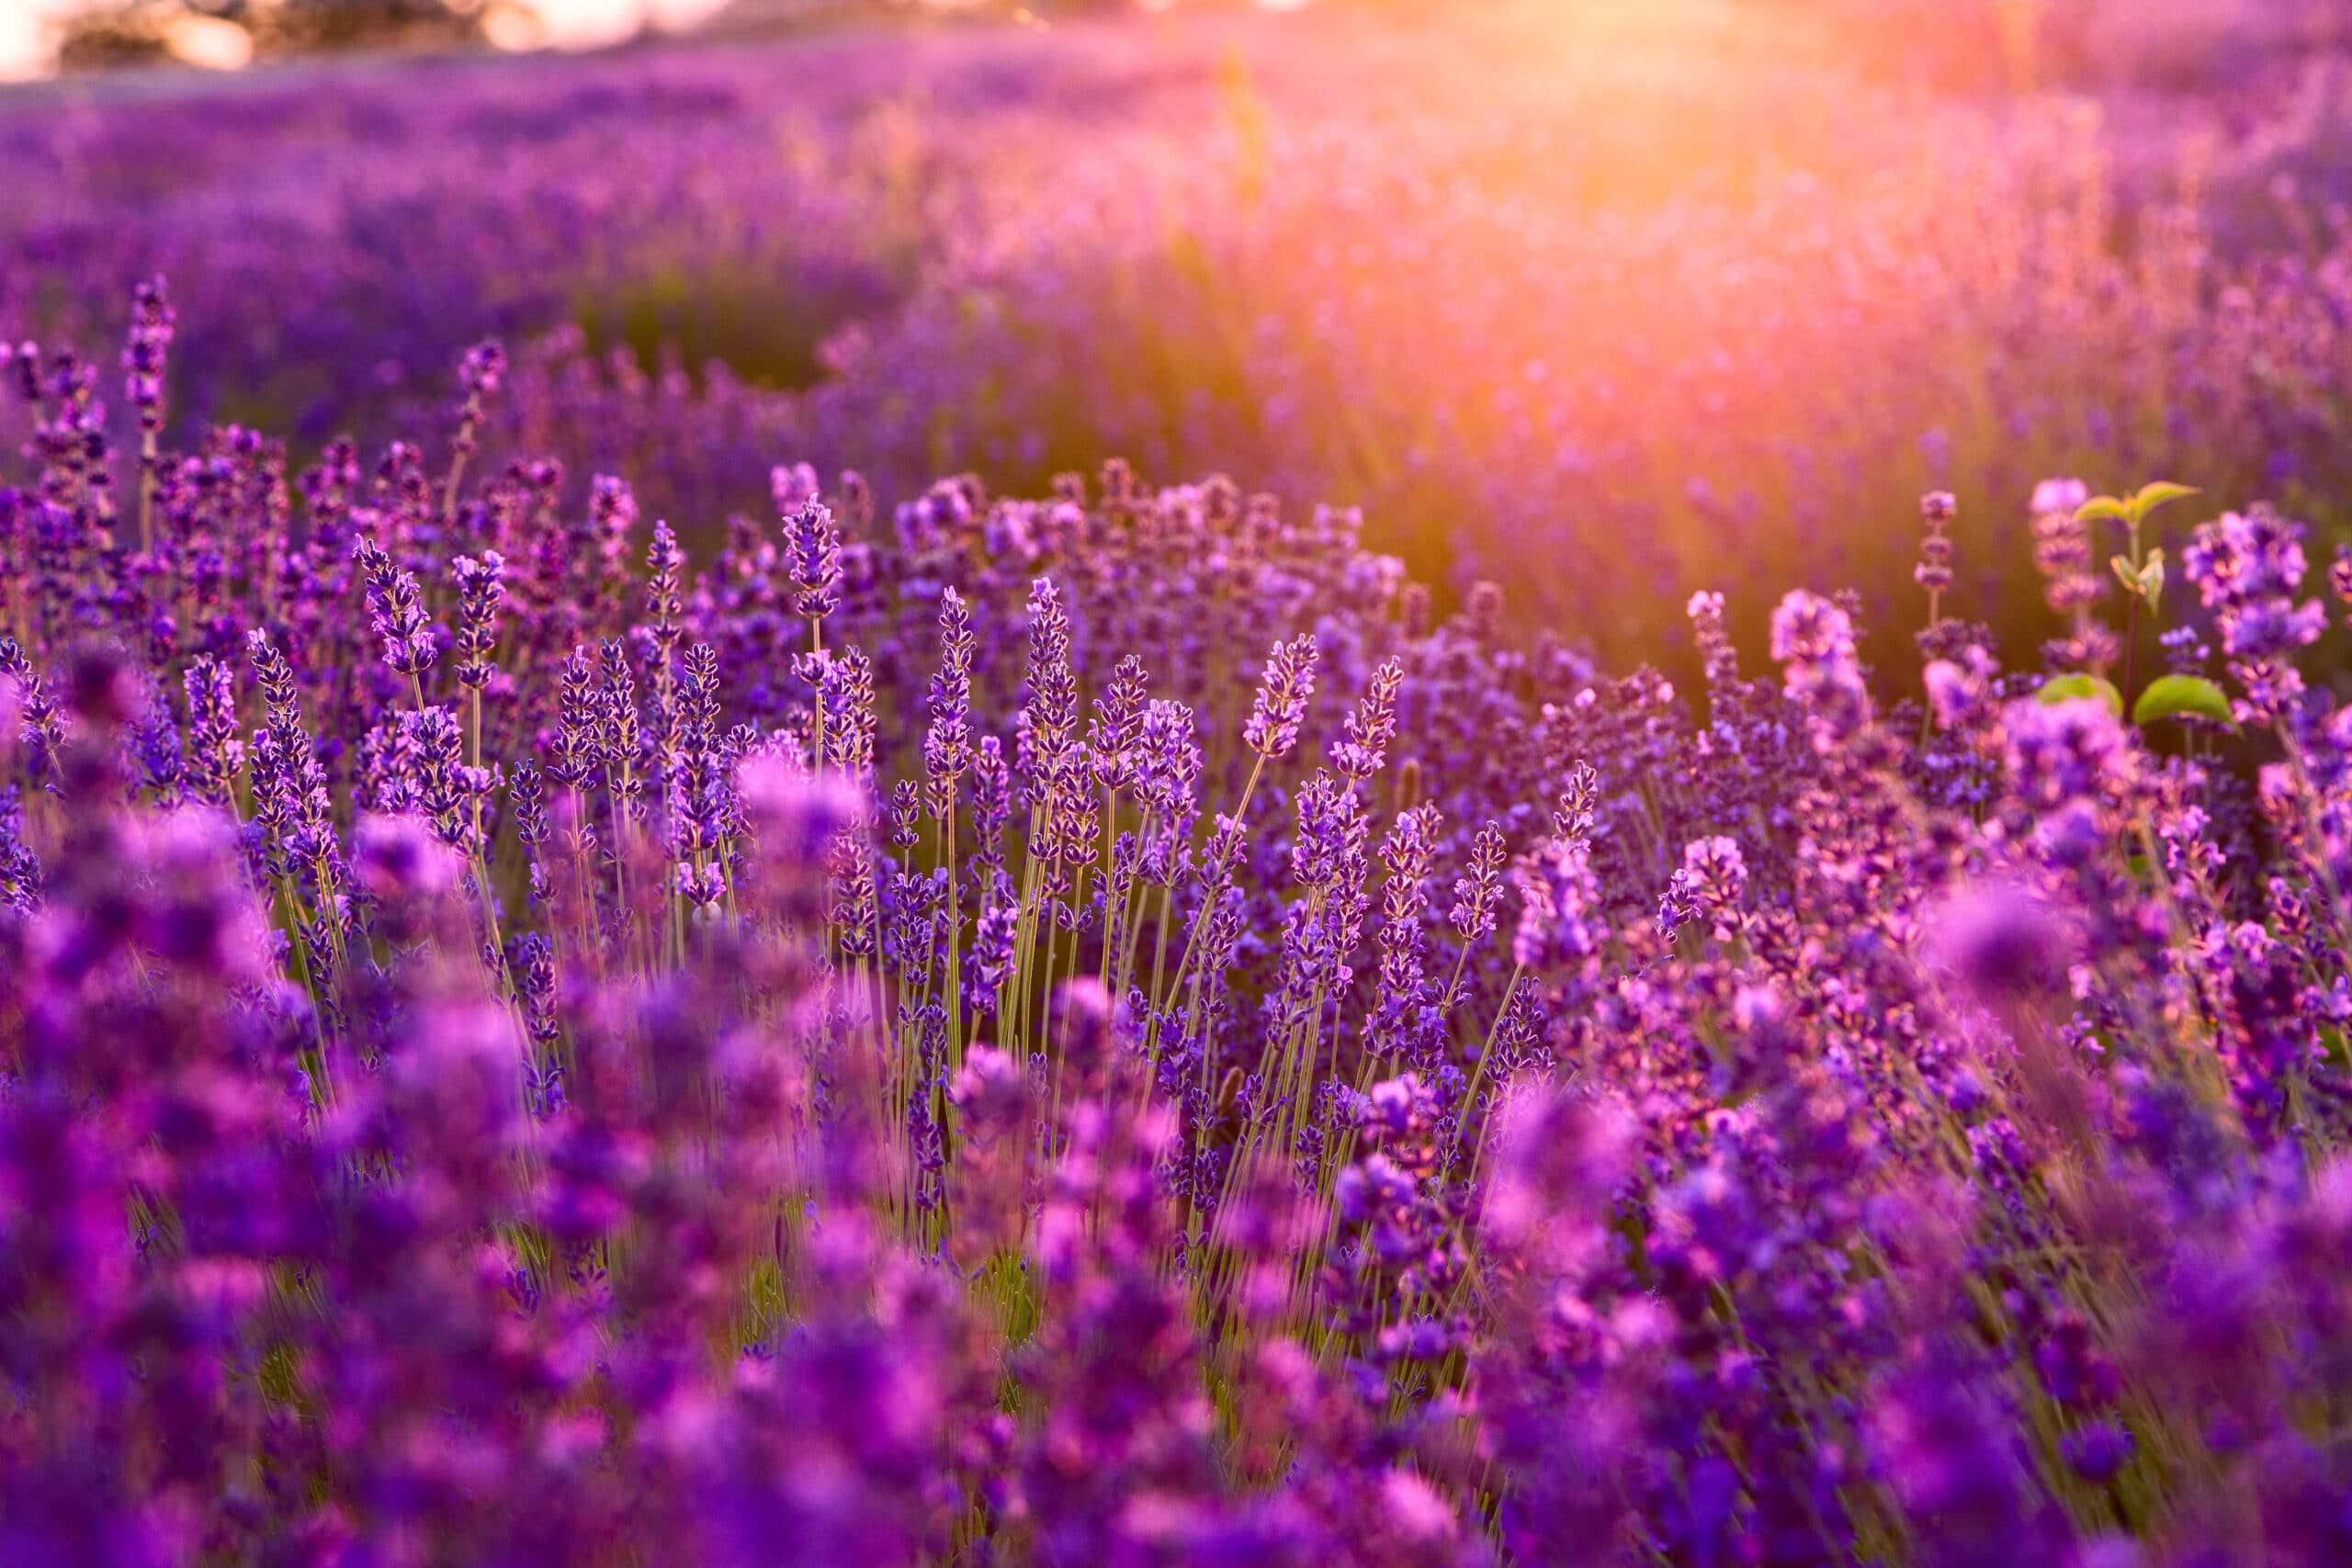 Lavender field in Tihany, Hungary